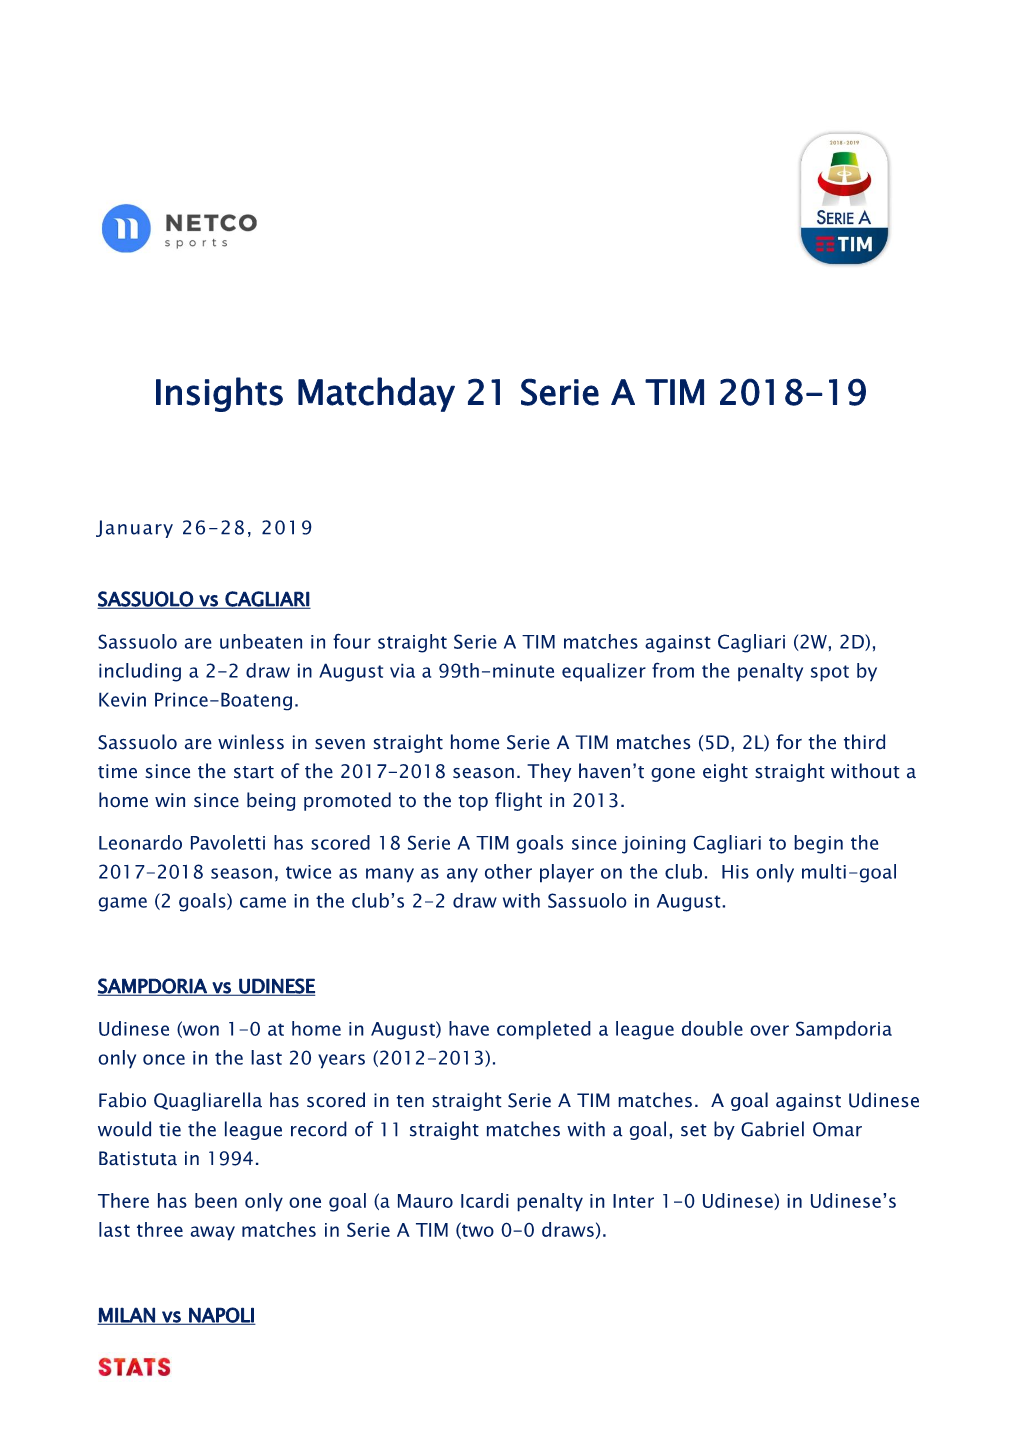 Insights Matchday 21 Serie a TIM 2018-19